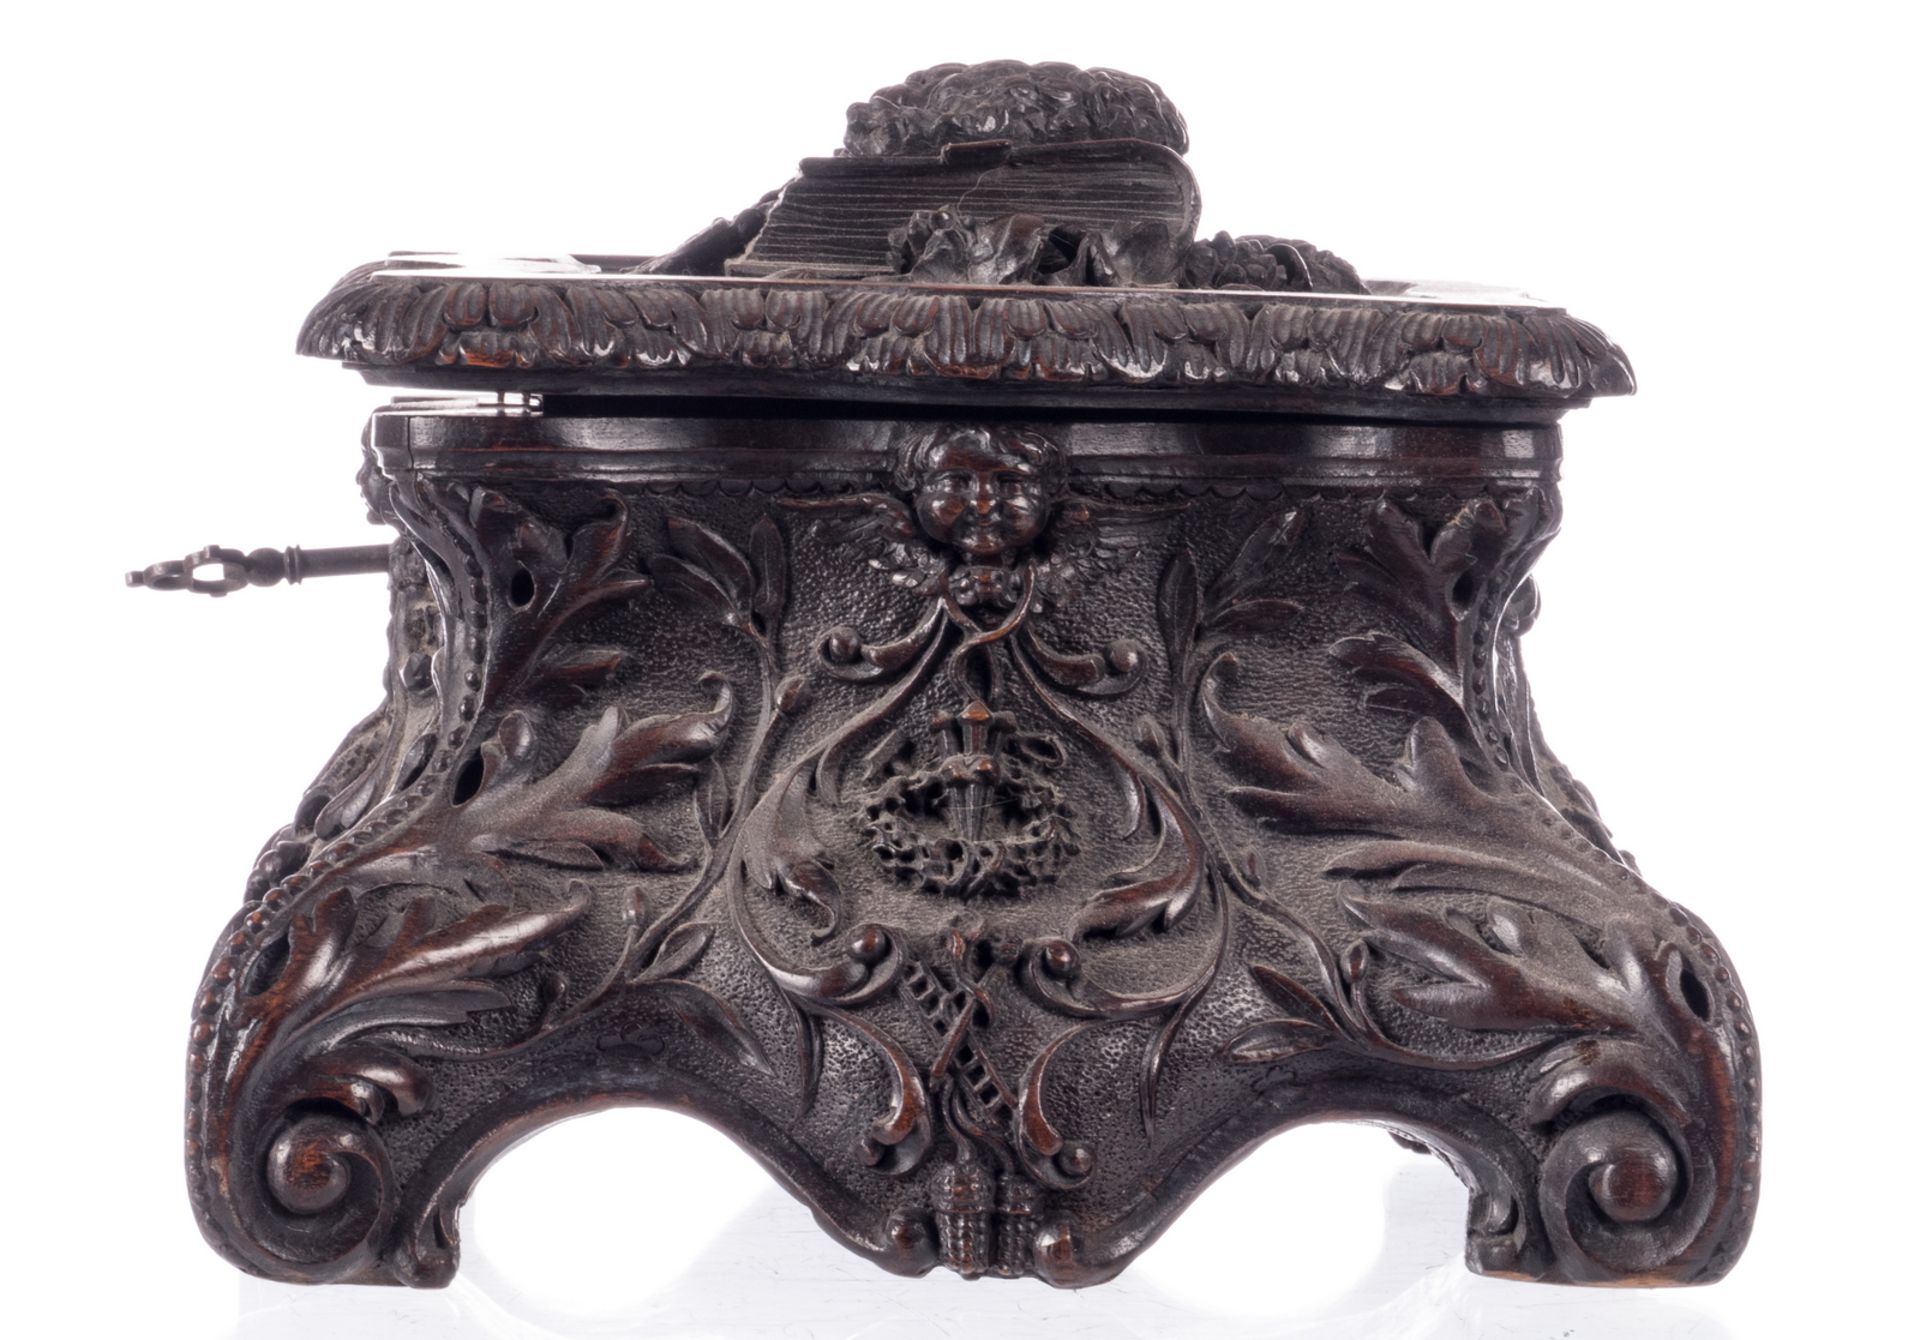 A sculpted walnut jewelry box decorated with religious symbols, H 16 - W 32 - D 26 cm - Bild 3 aus 11